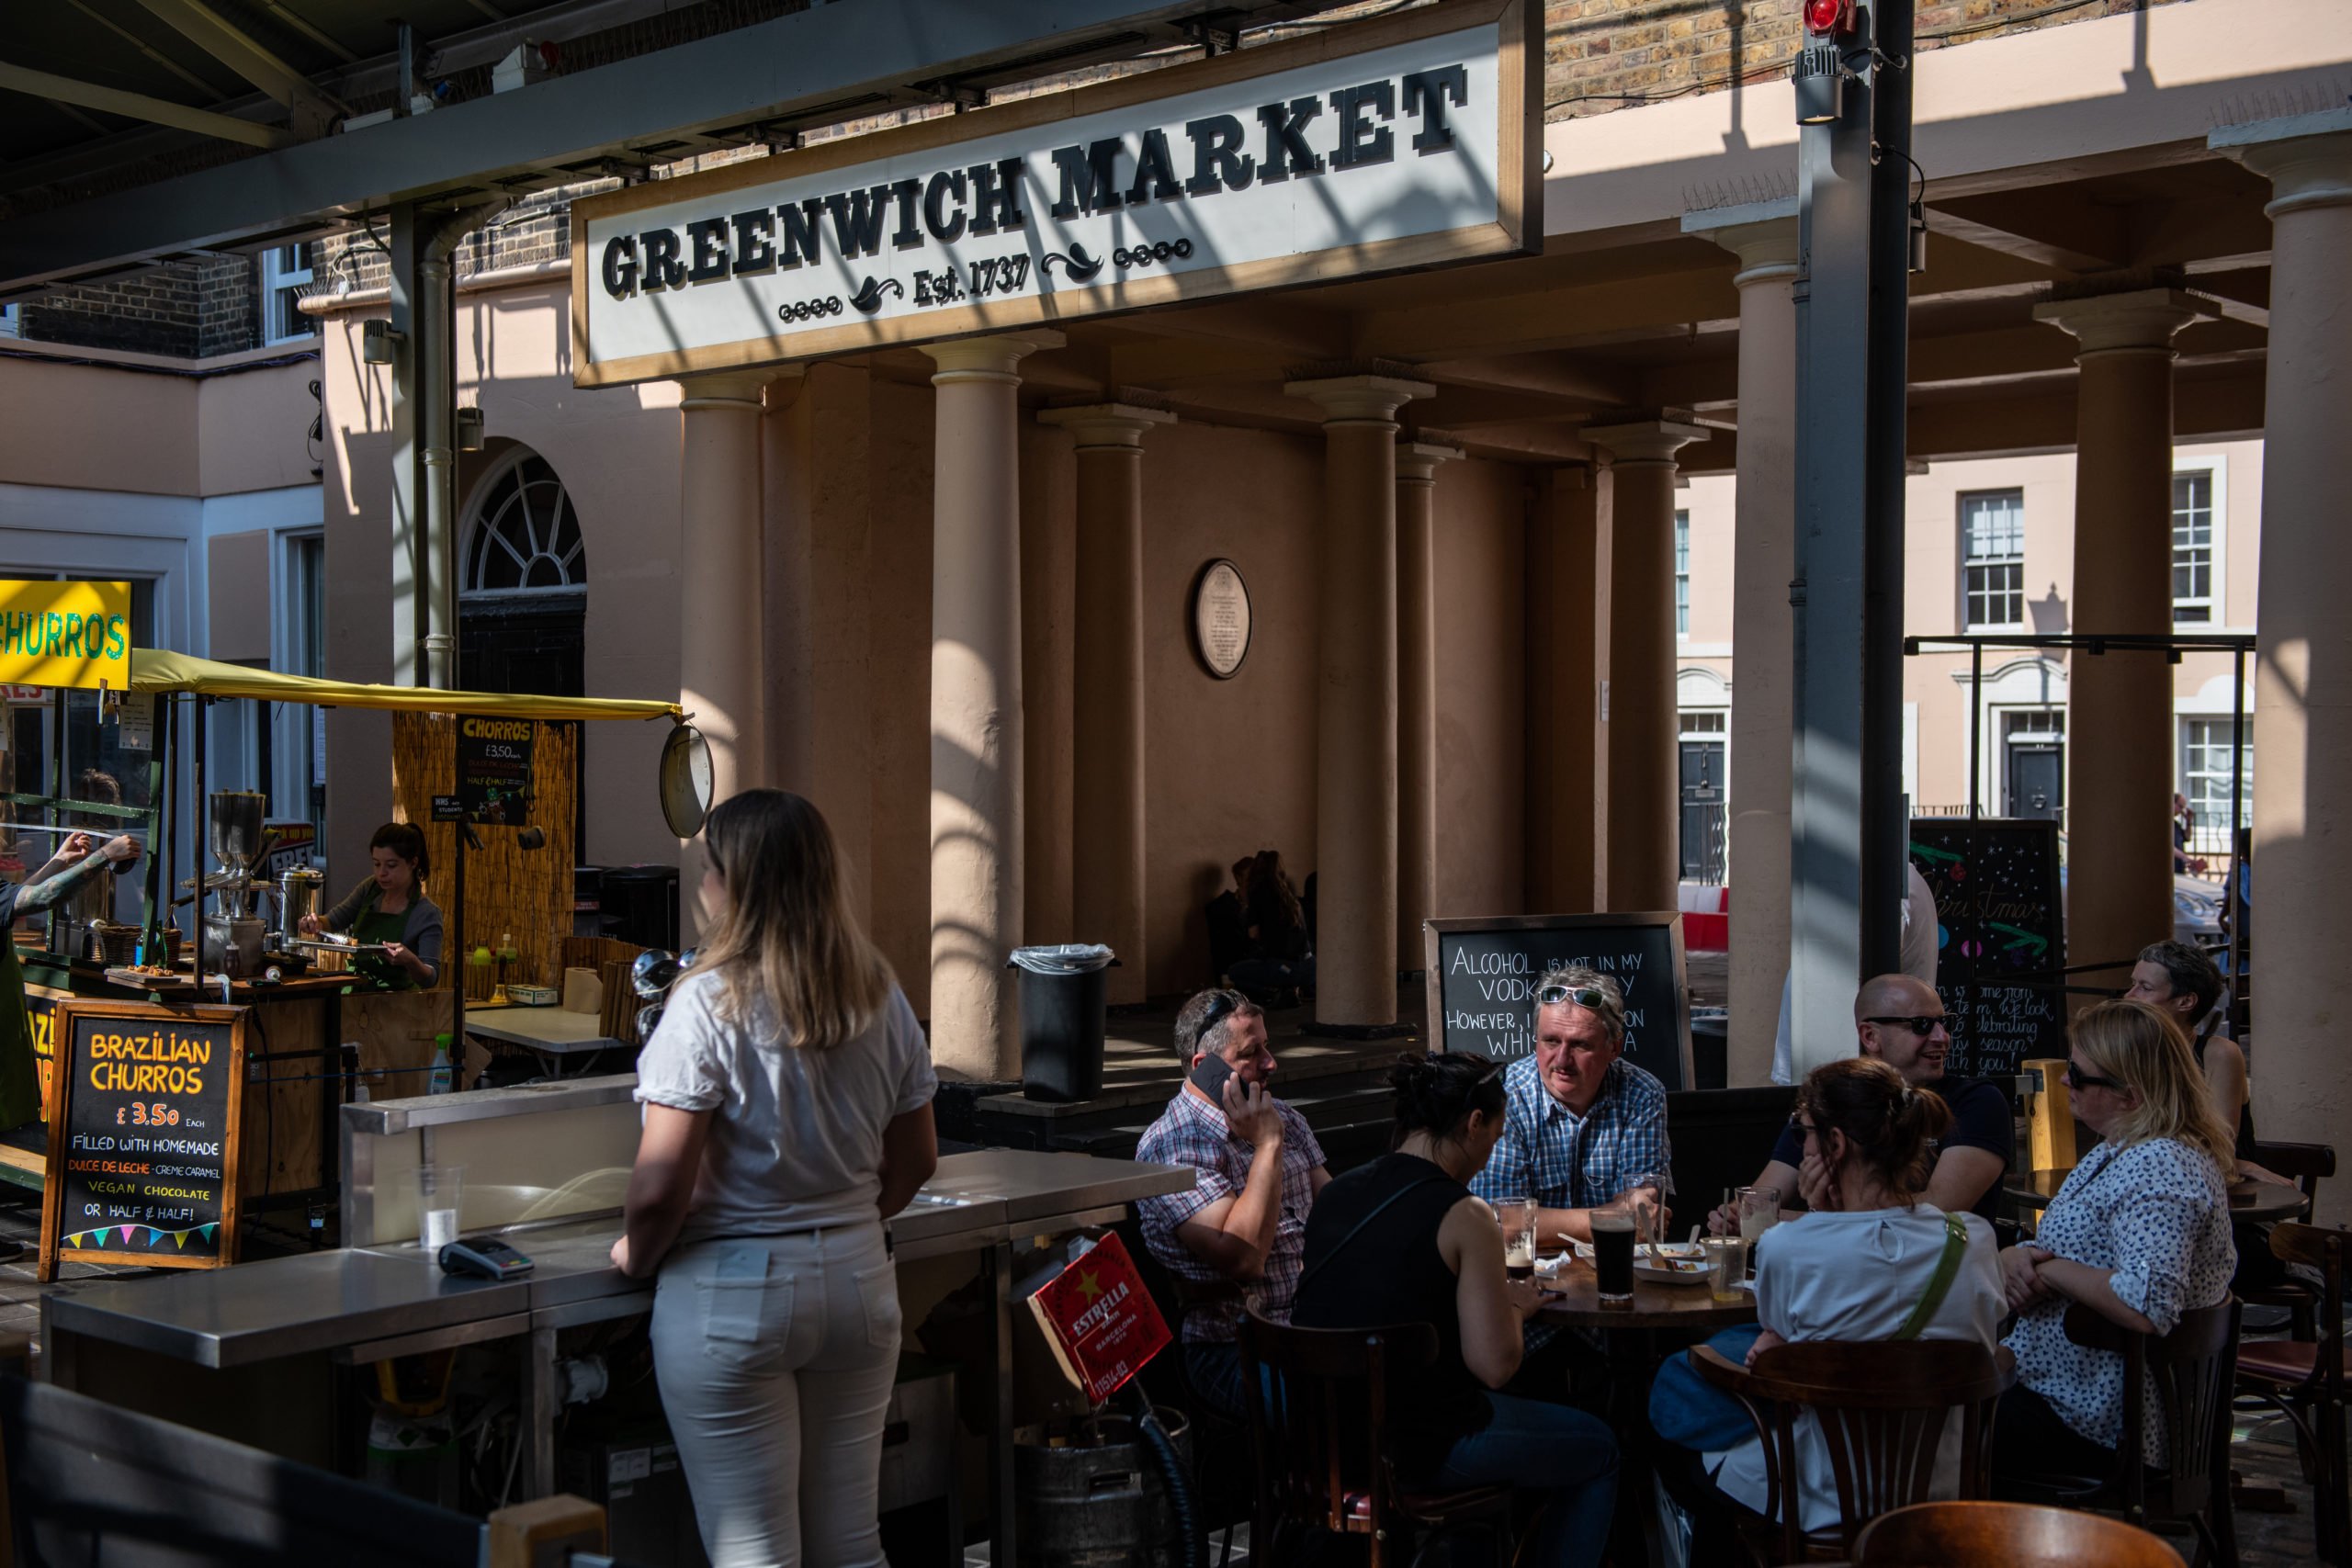 LONDON, ENGLAND - SEPTEMBER 20: A group of six people drink alcohol at a pub in Greenwich market on September 20, 2020 in London, England. The British government reported 4,422 confirmed UK cases on Saturday, the first time the number of new daily cases has exceeded 4,000 since the virus's peak in May. The prime minister said England was "now seeing a second wave." (Photo by Chris J Ratcliffe/Getty Images)